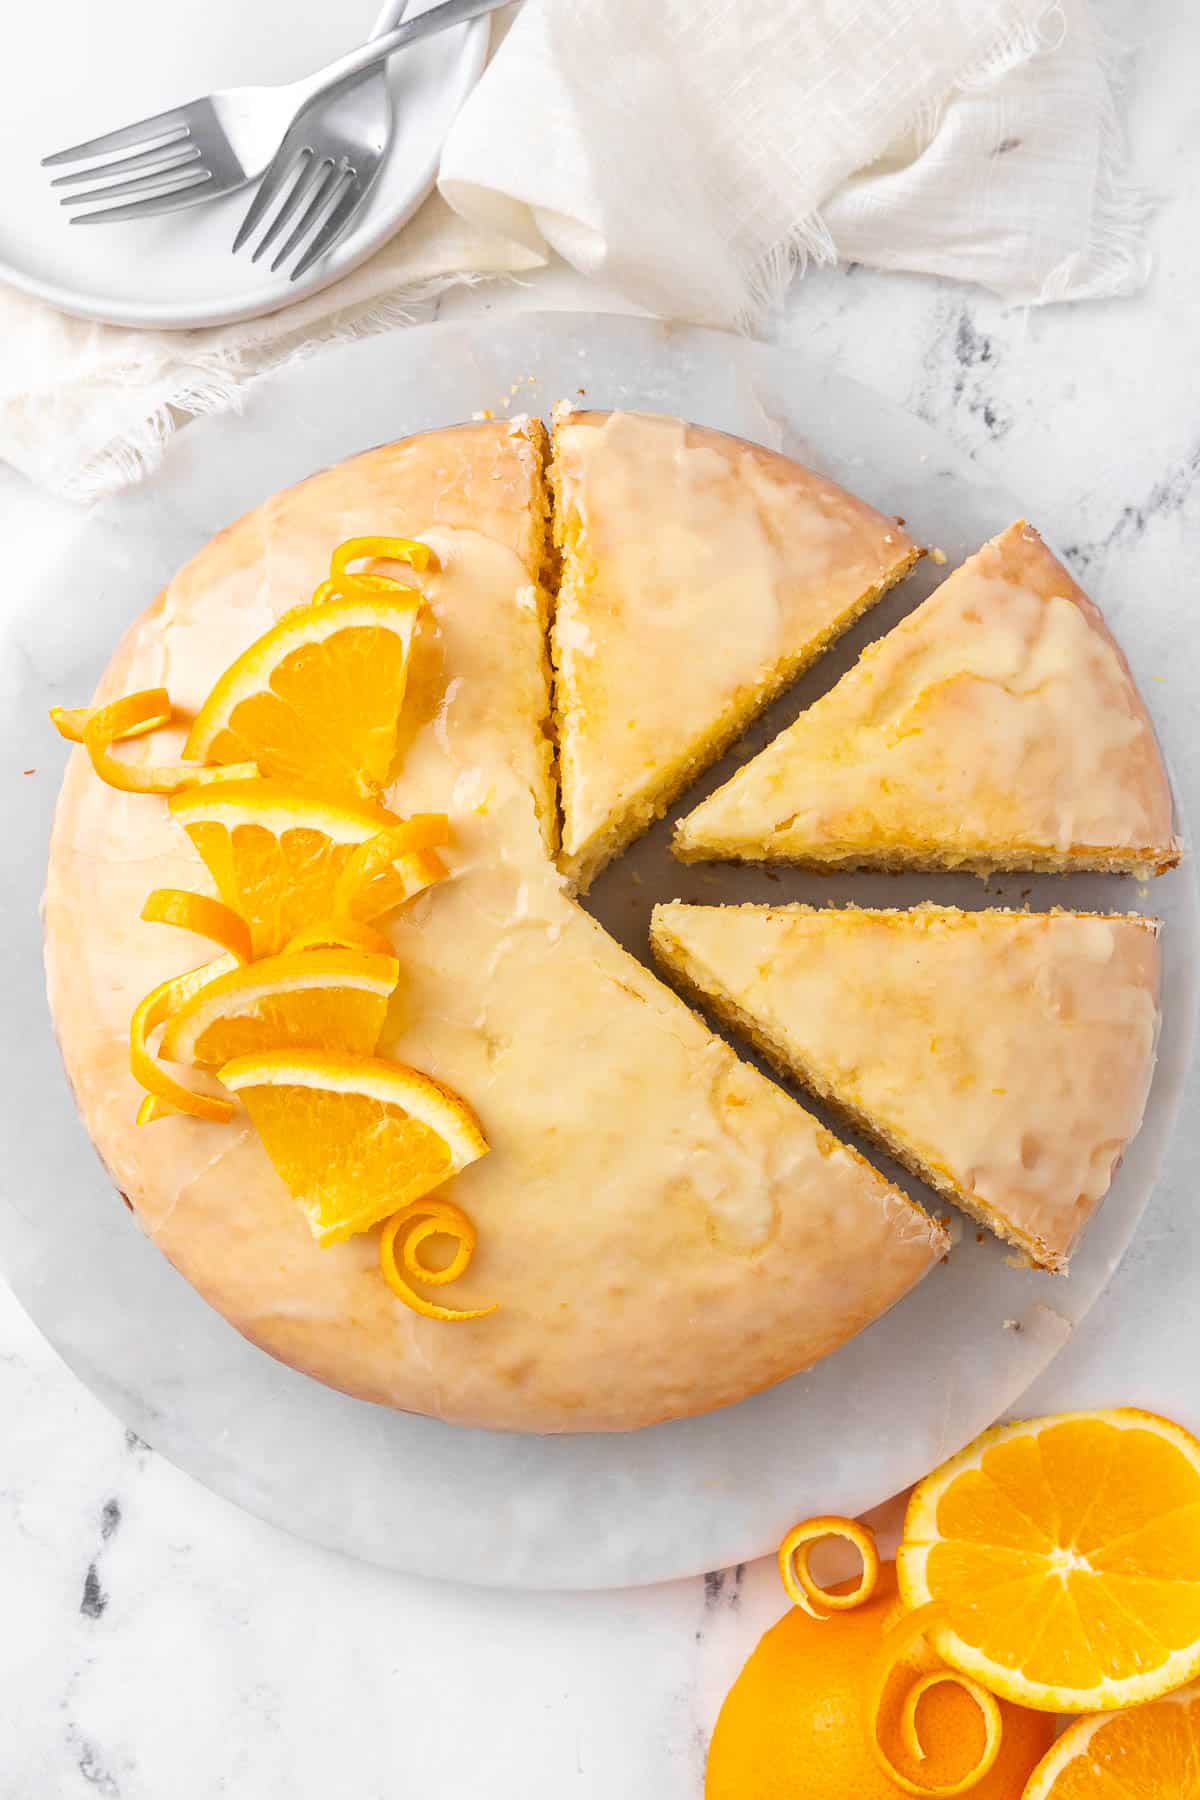 Orange cake on a marble plate with 3 slices cut out; napkin, forks, small plate, and orange slices nearby.